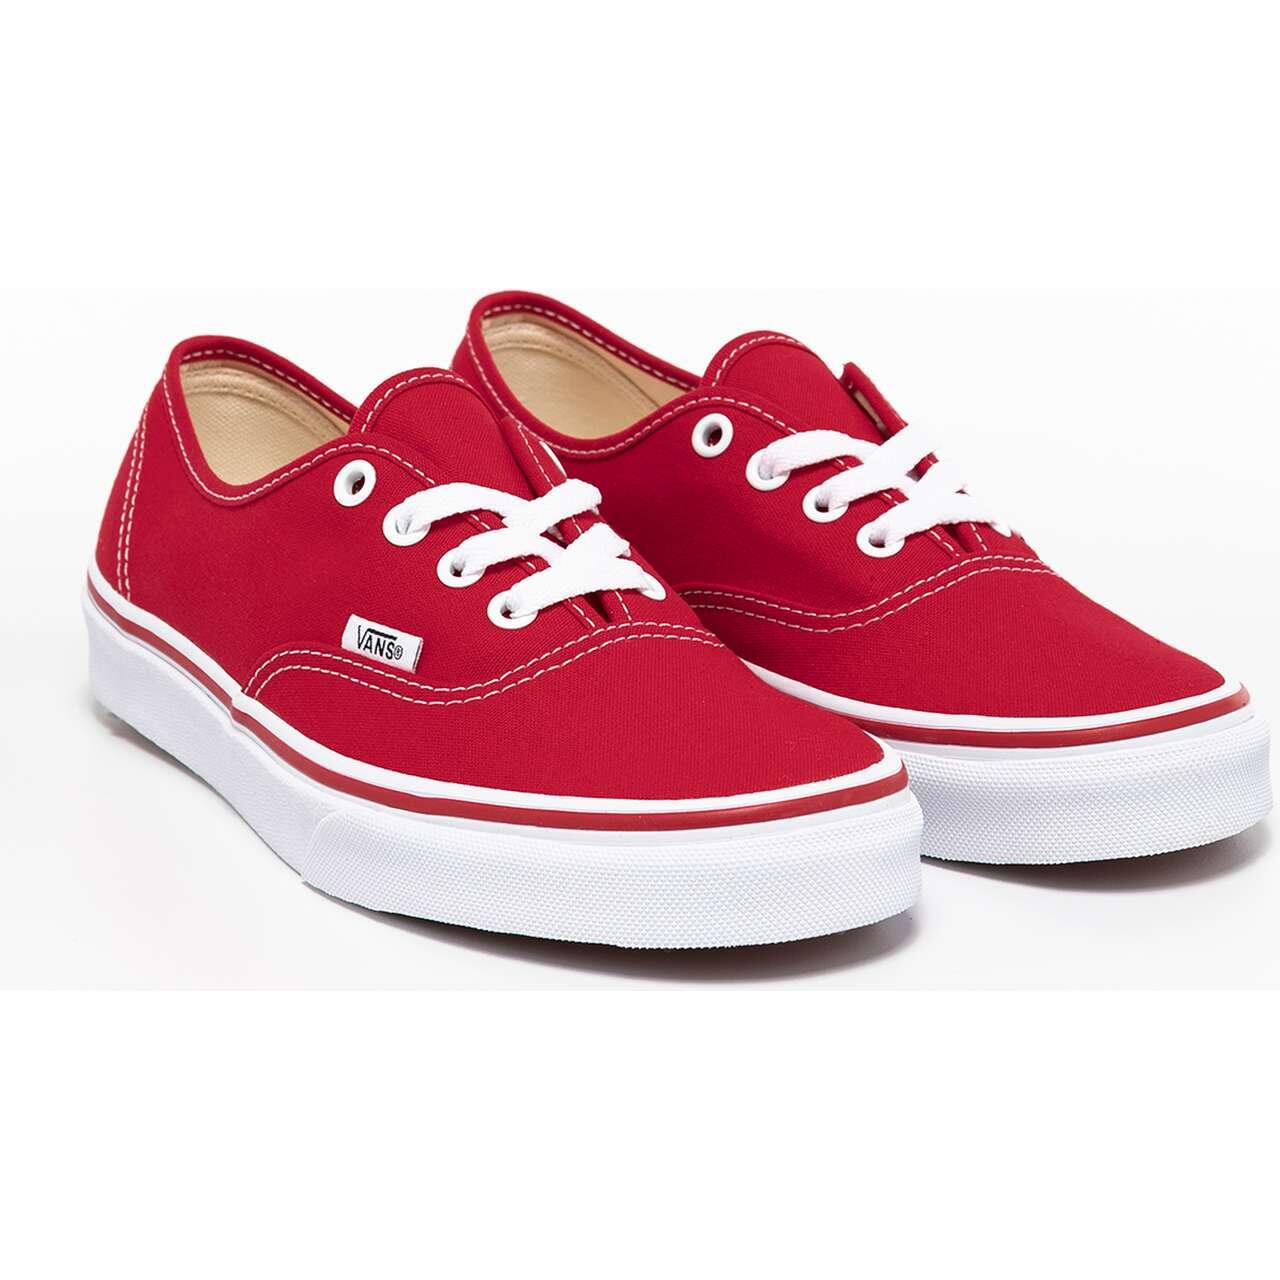 Authentic Red Shoe EE3RED 2/6